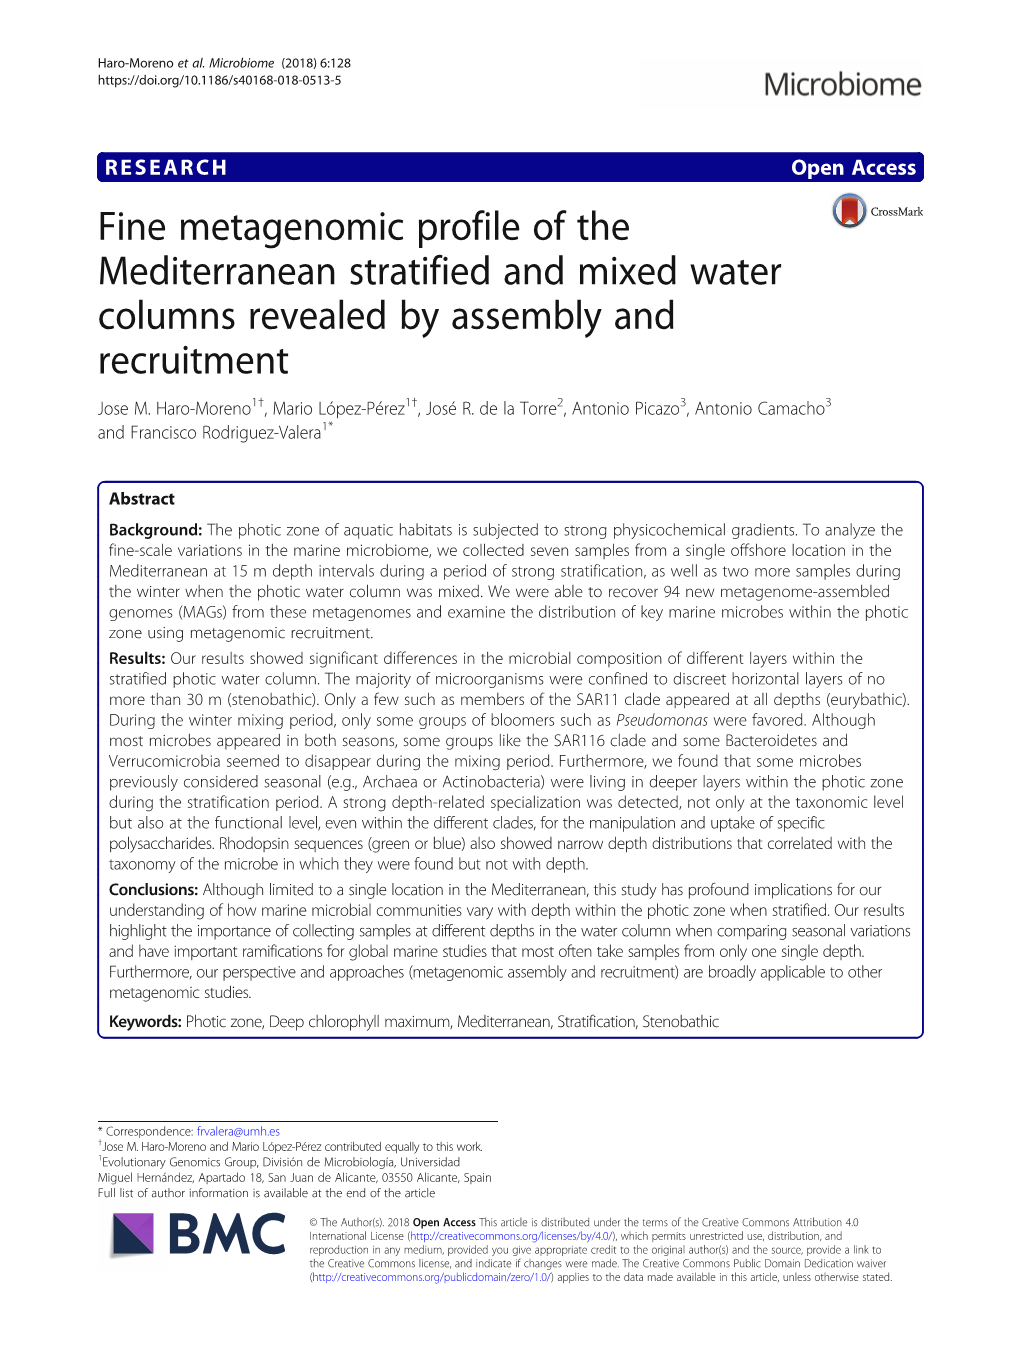 Fine Metagenomic Profile of the Mediterranean Stratified and Mixed Water Columns Revealed by Assembly and Recruitment Jose M